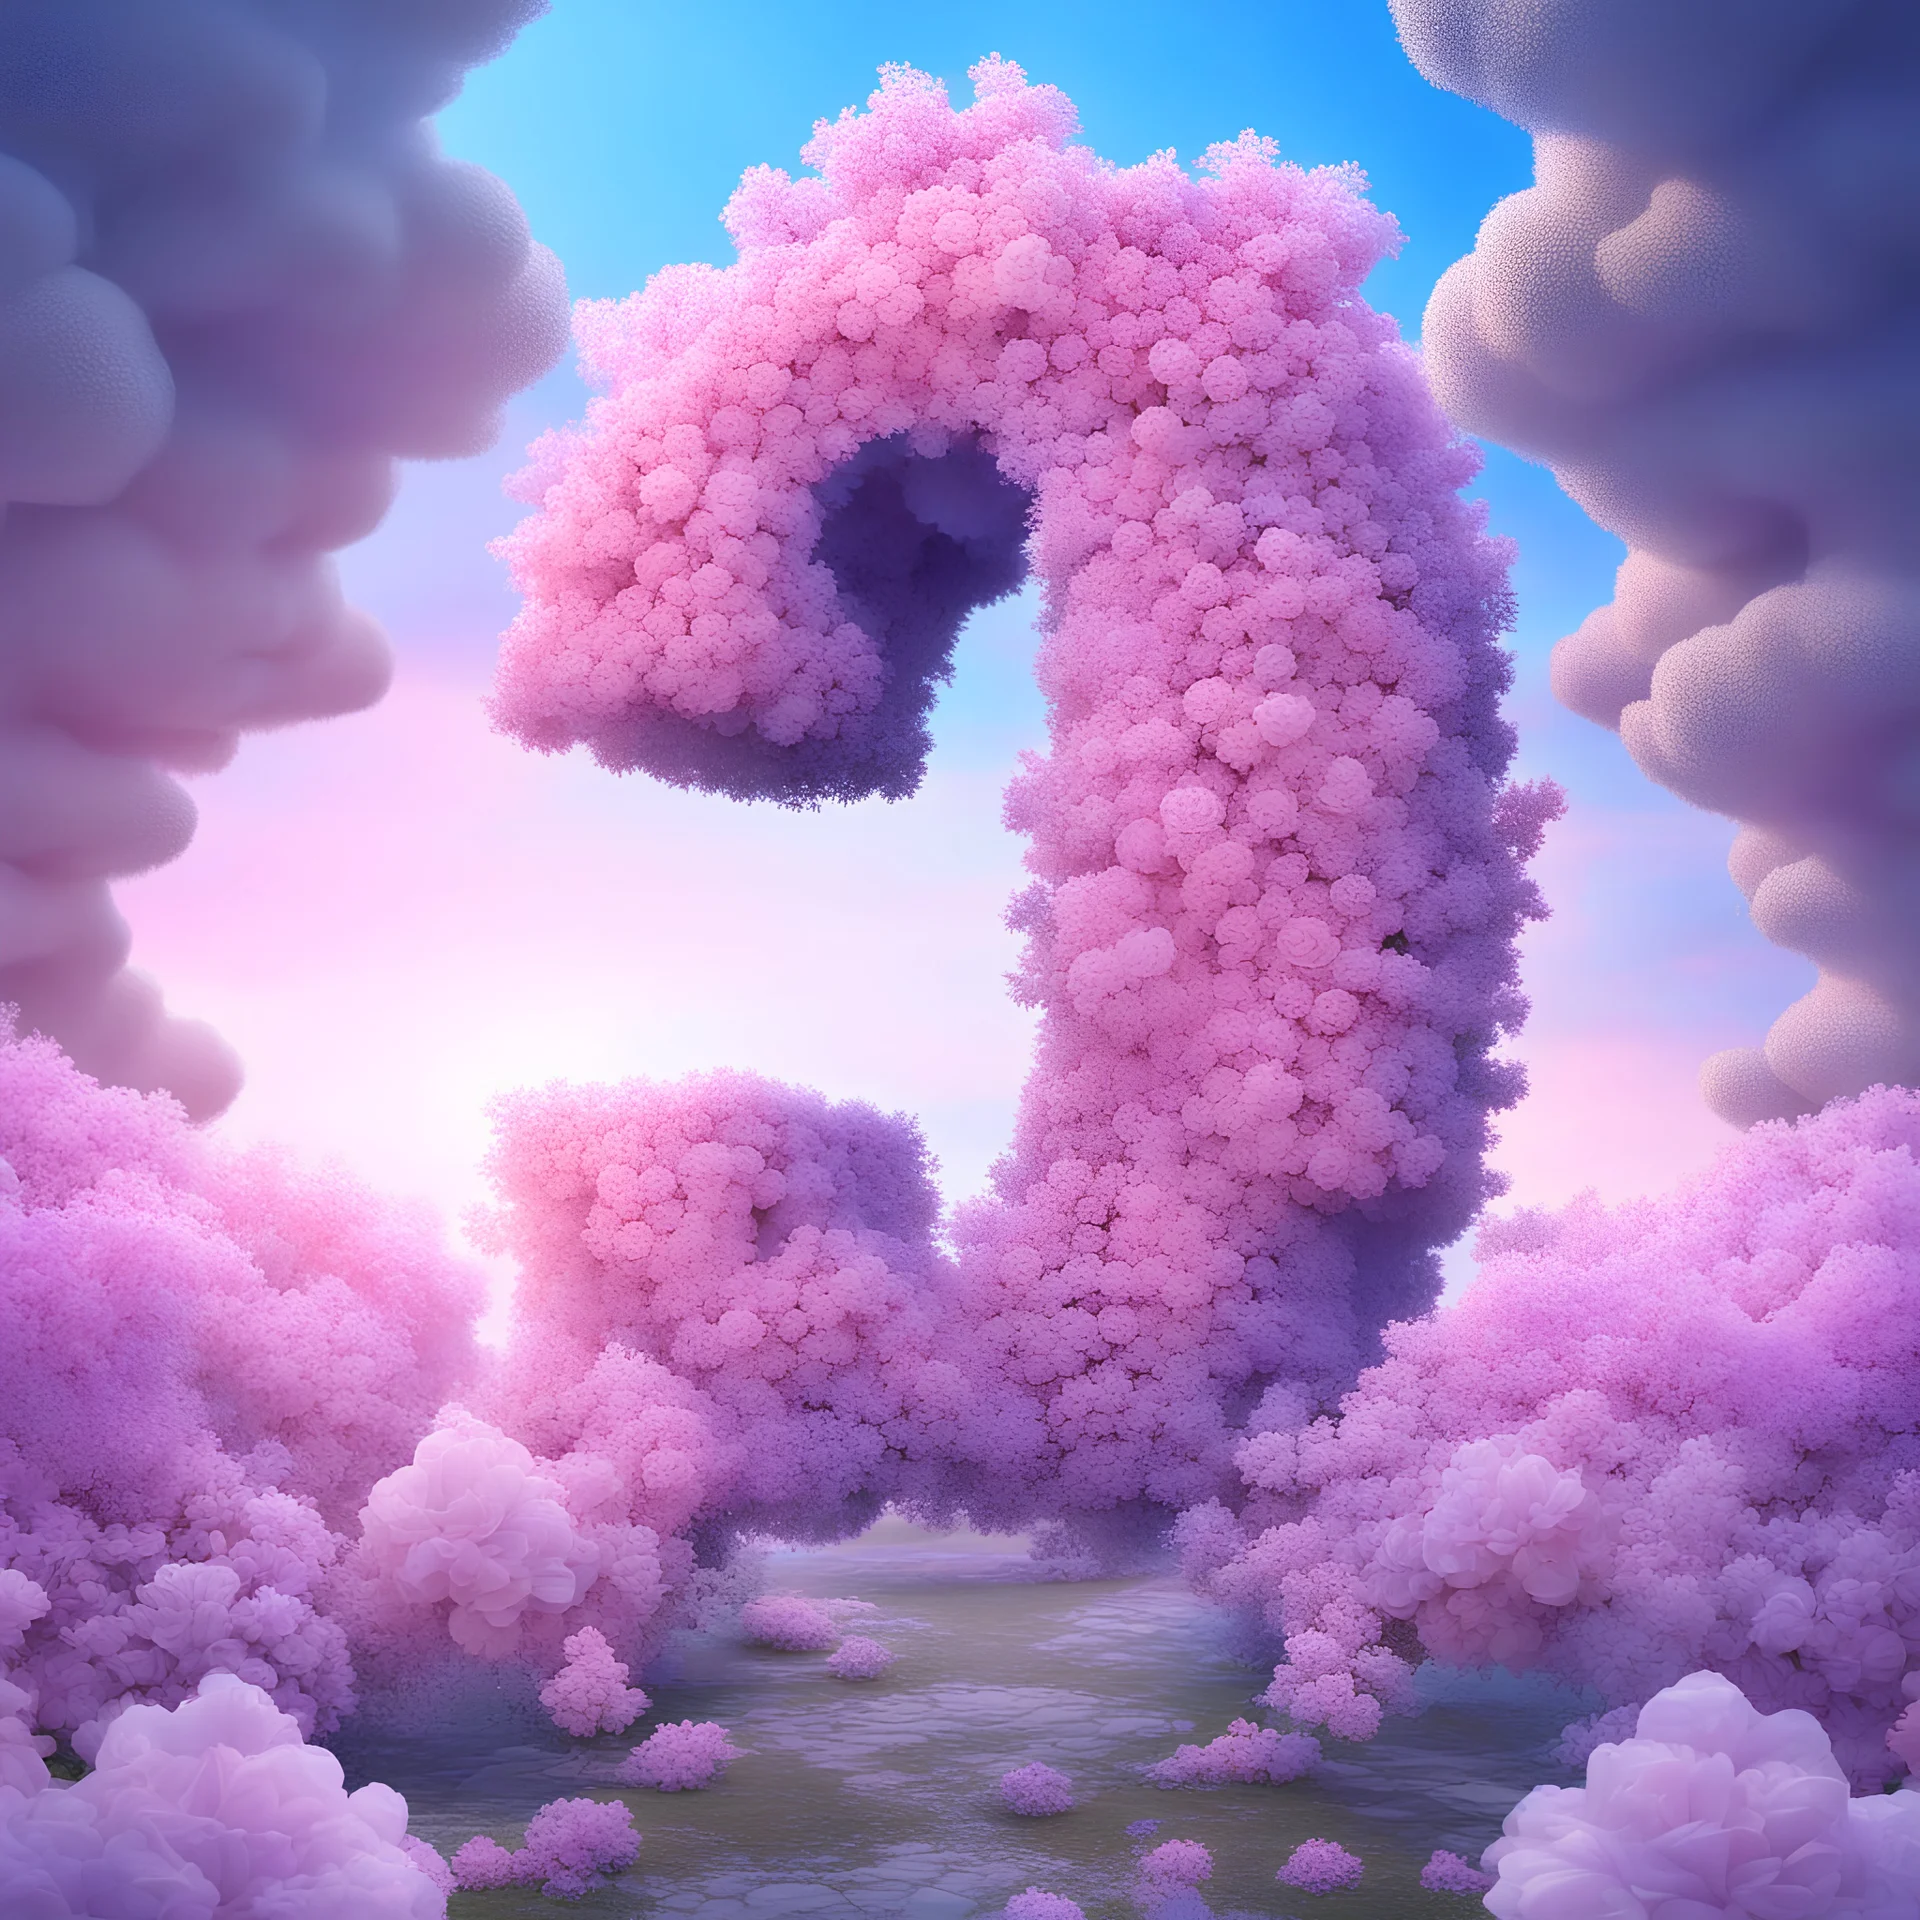 A countdown poster with the number "1", character "1", made of flowers, pink purple blue, three-dimensional, Light Blue sky and dysney background，Chinese Zen style, Surrealist photography, C4D rendering, oc rendering --s 250